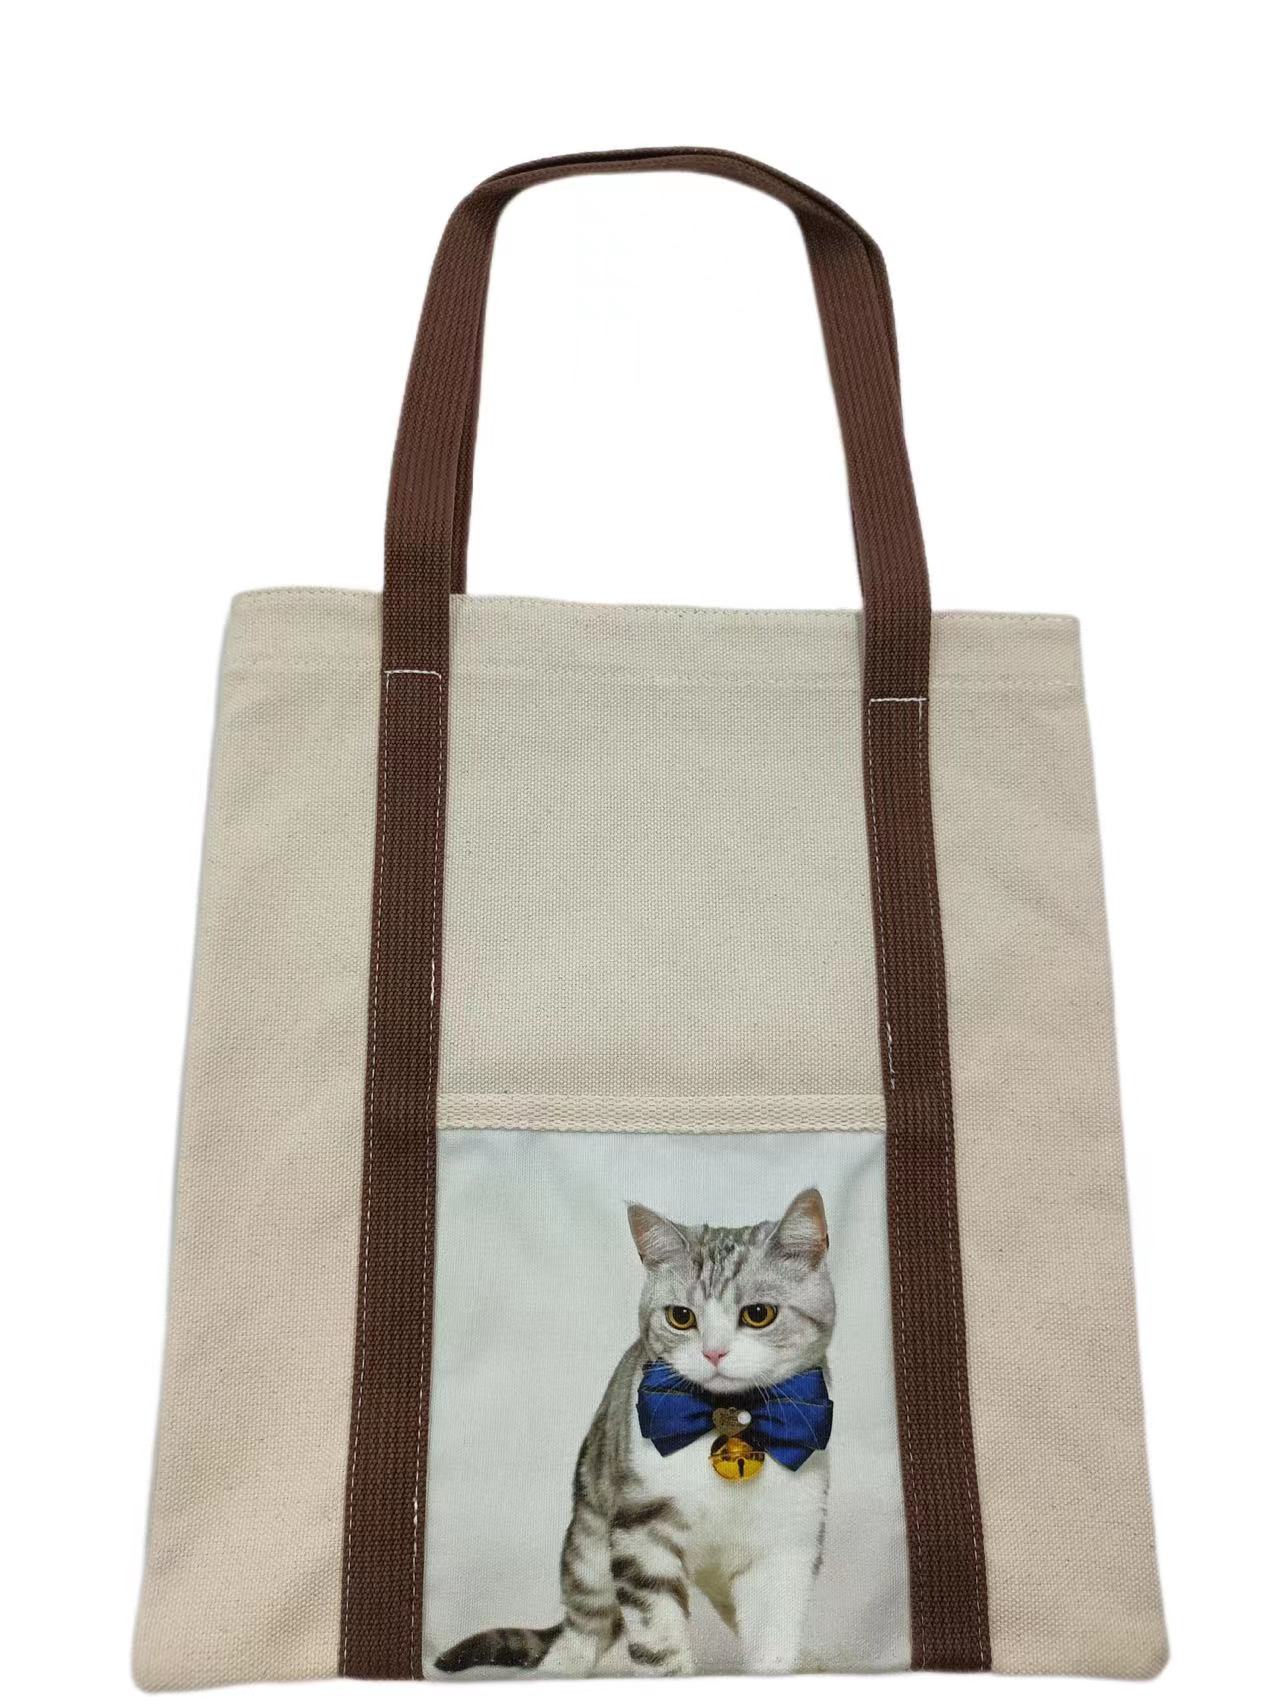 Master the Craft: The Art of Bag Printing on Canvas Tote Bags